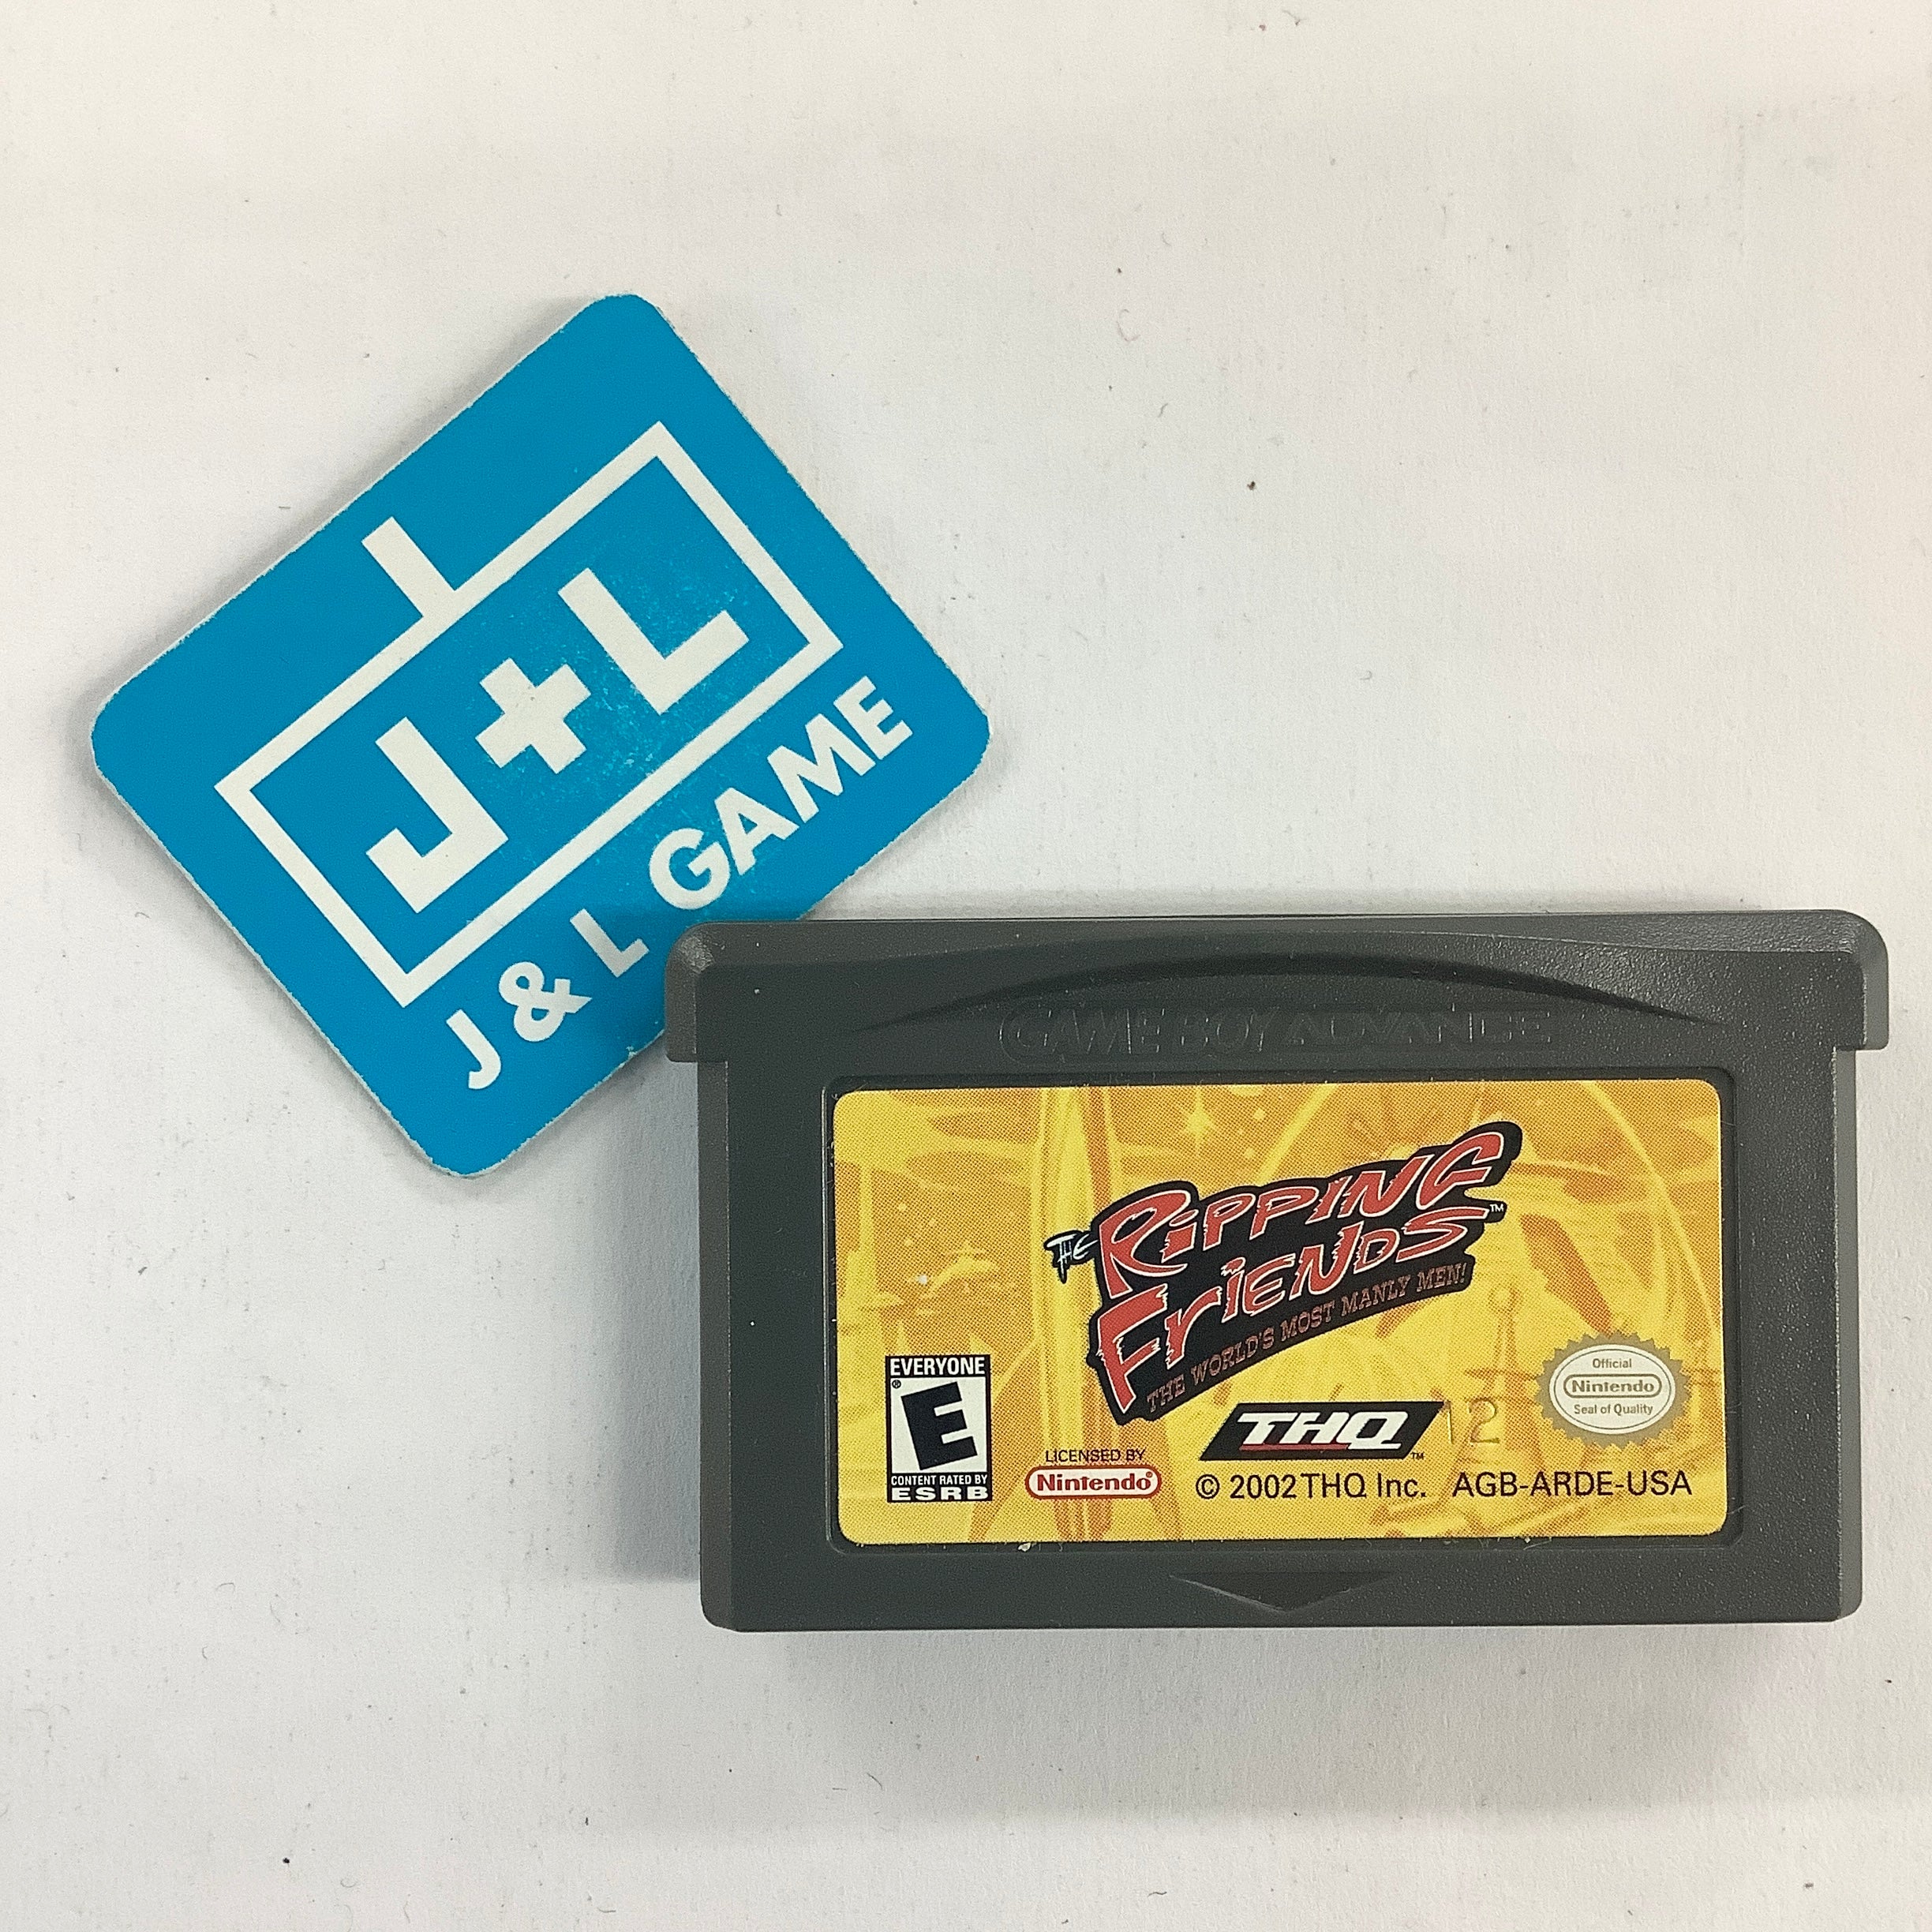 The Ripping Friends: The World's Most Manly Men! - (GBA) Game Boy Advance [Pre-Owned] Video Games THQ   